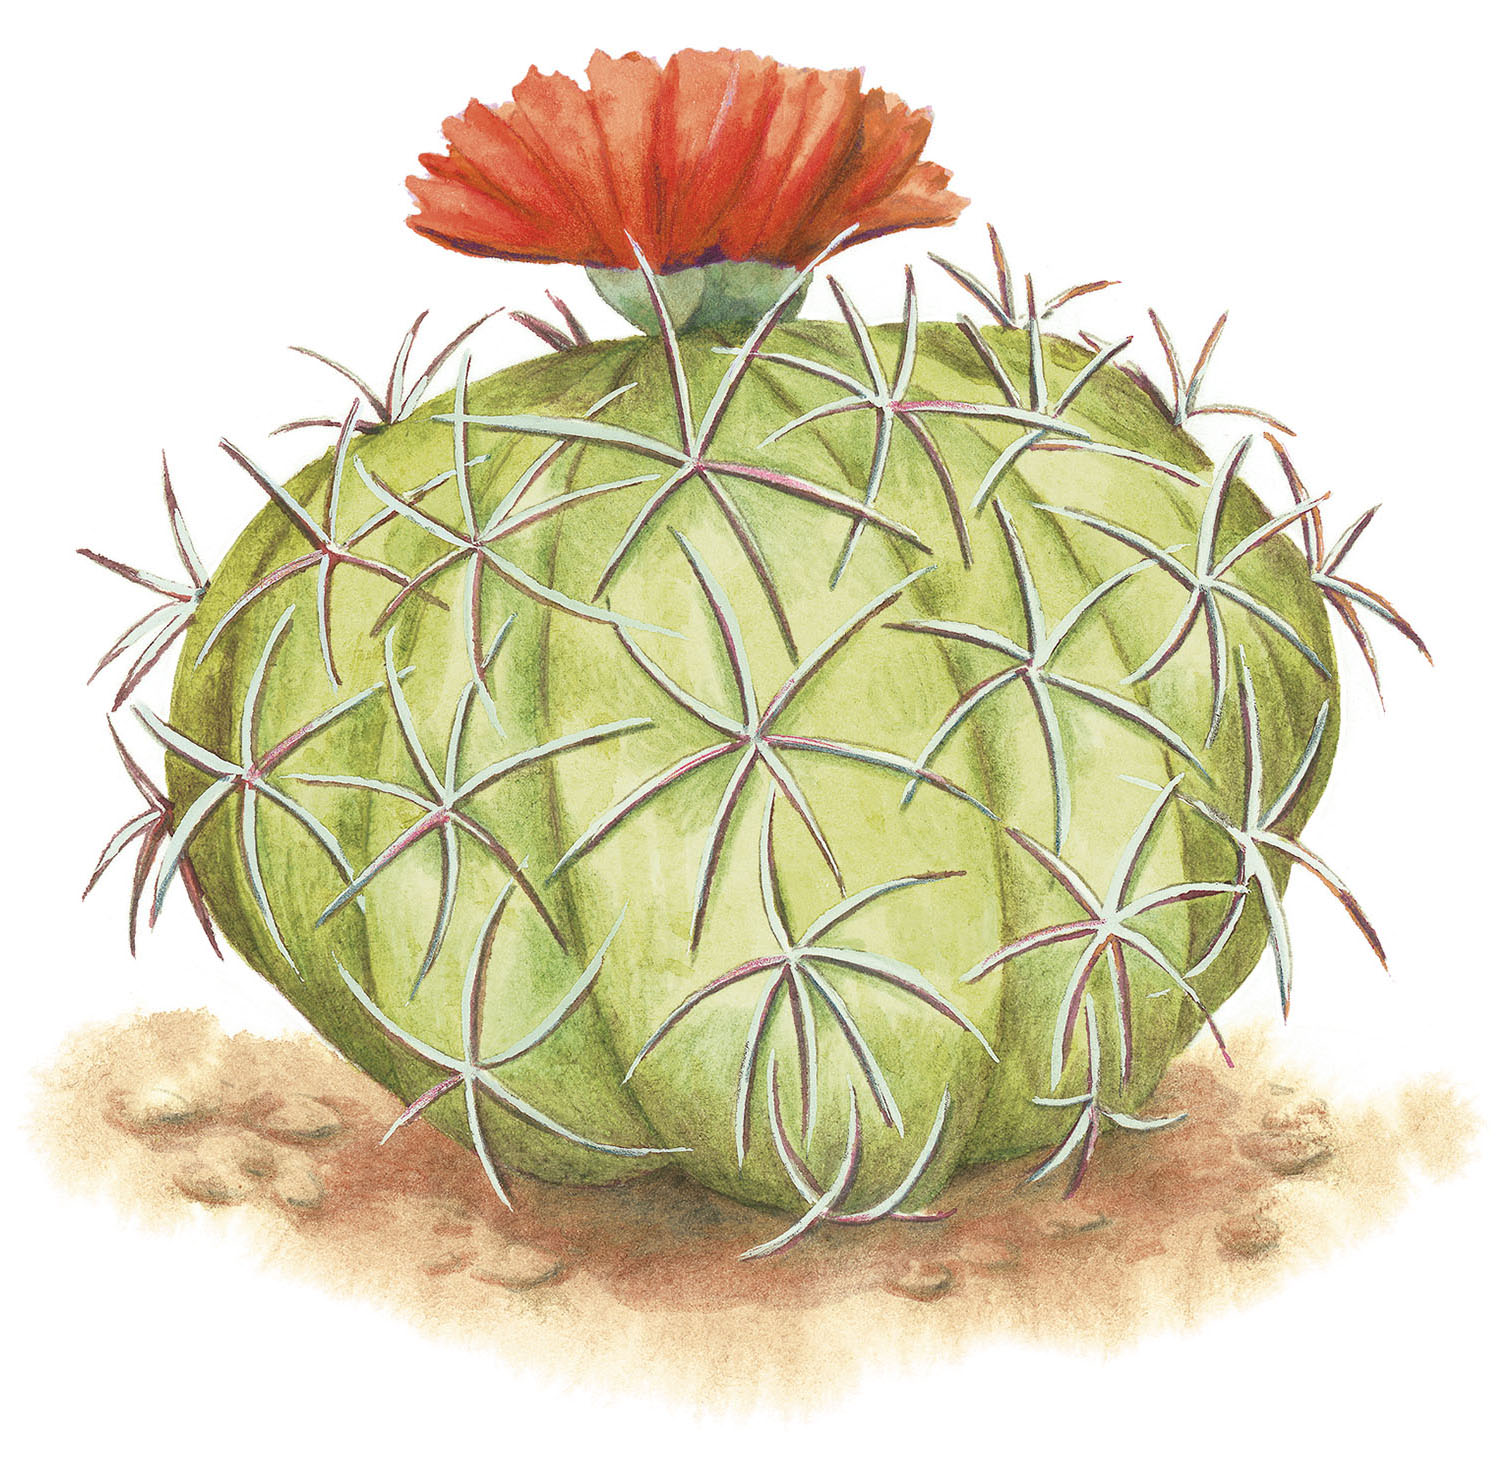 An illustration of an Eagle Claw cactus, a small round cactus with numerous spikes and a pink flower on top